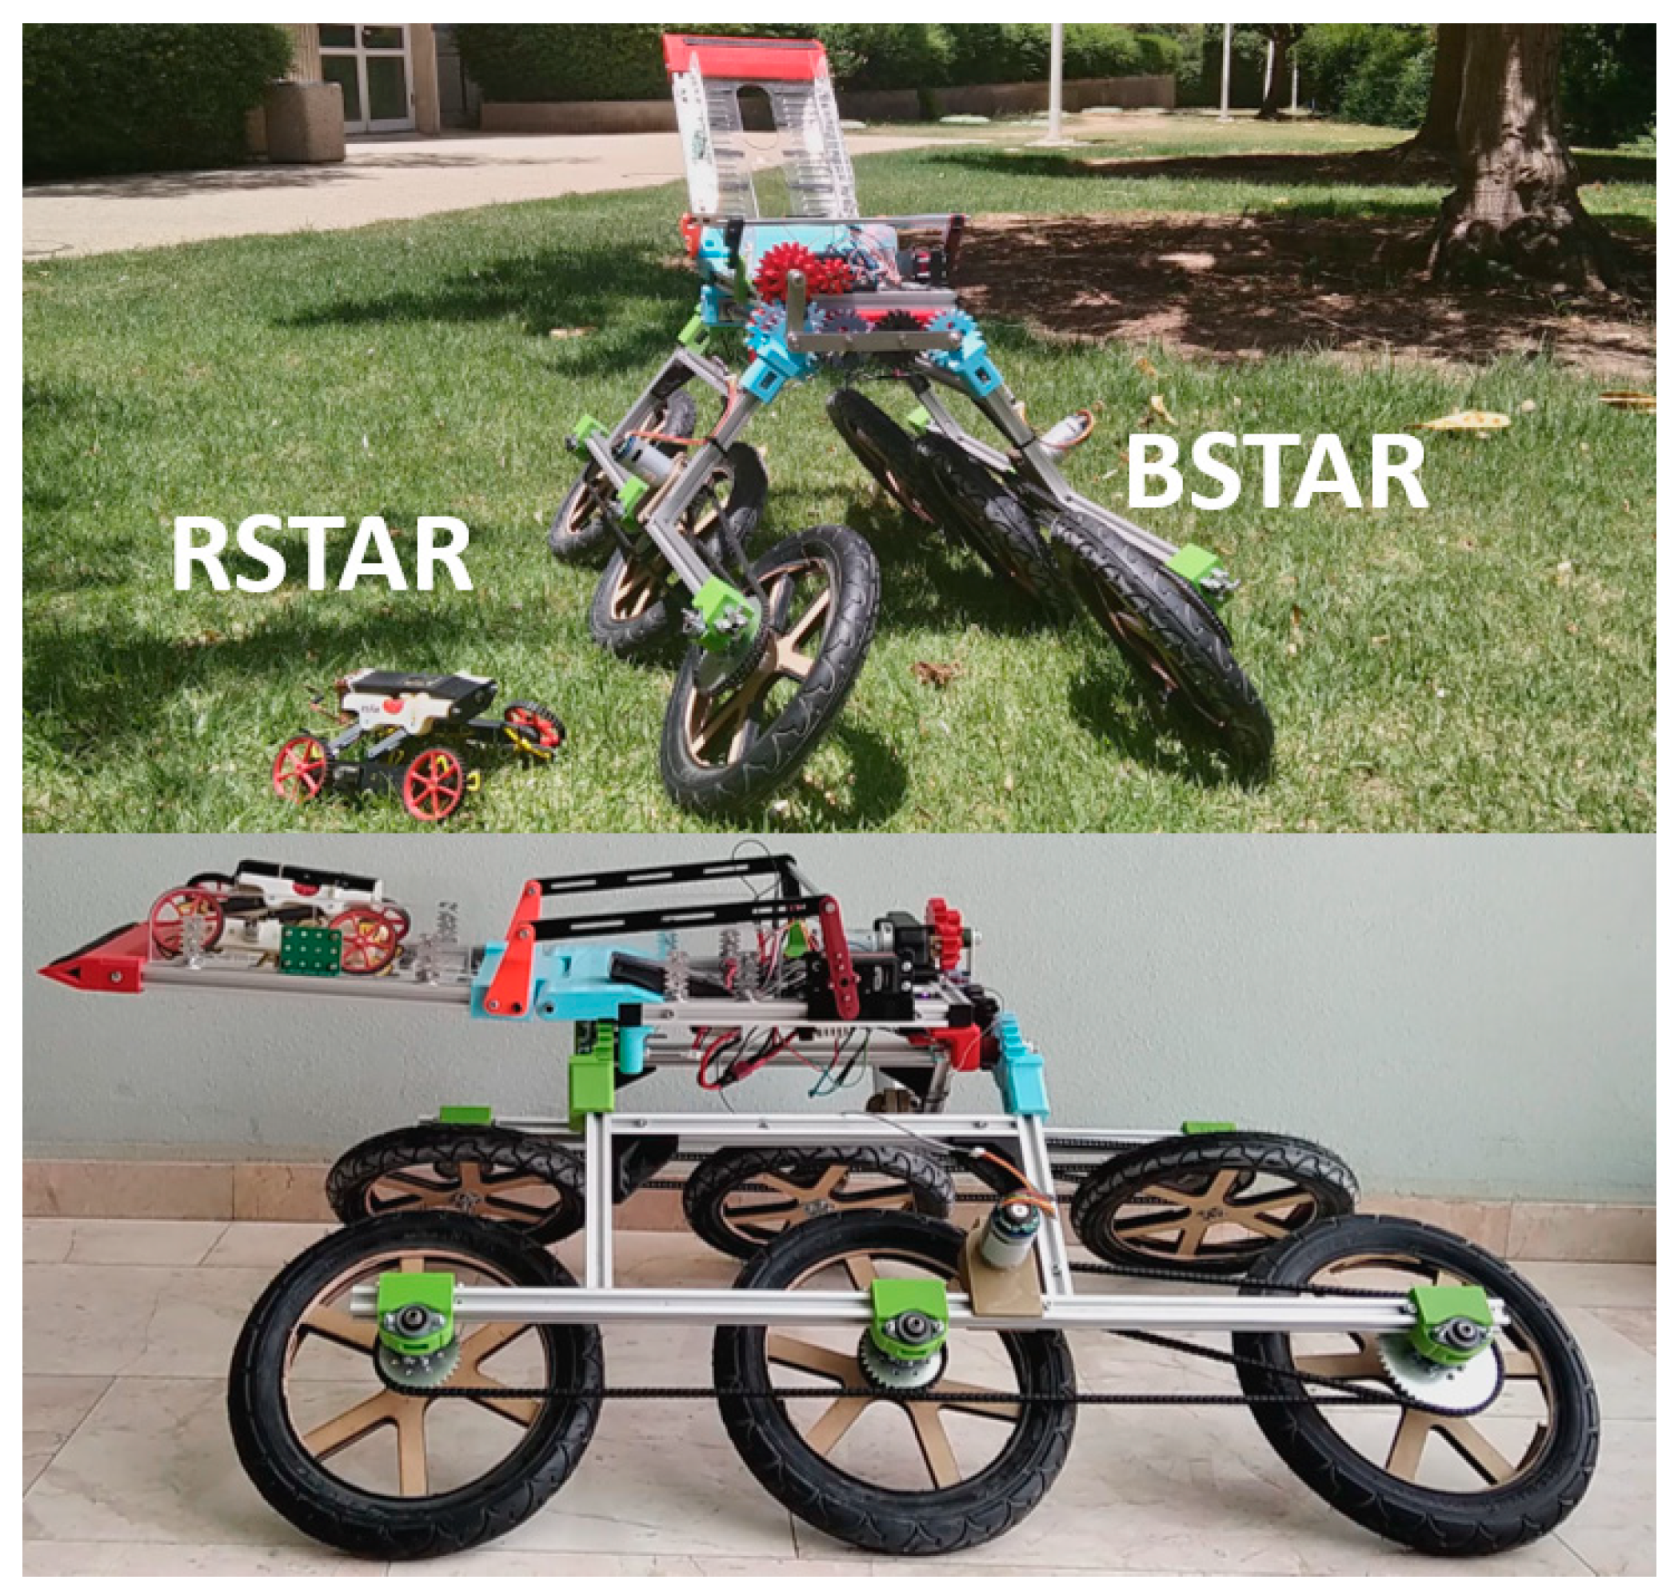 Applied Sciences | Free Full-Text | Design and Modeling of a Parent Big  STAR Robot Platform That Carries a Child RSTAR